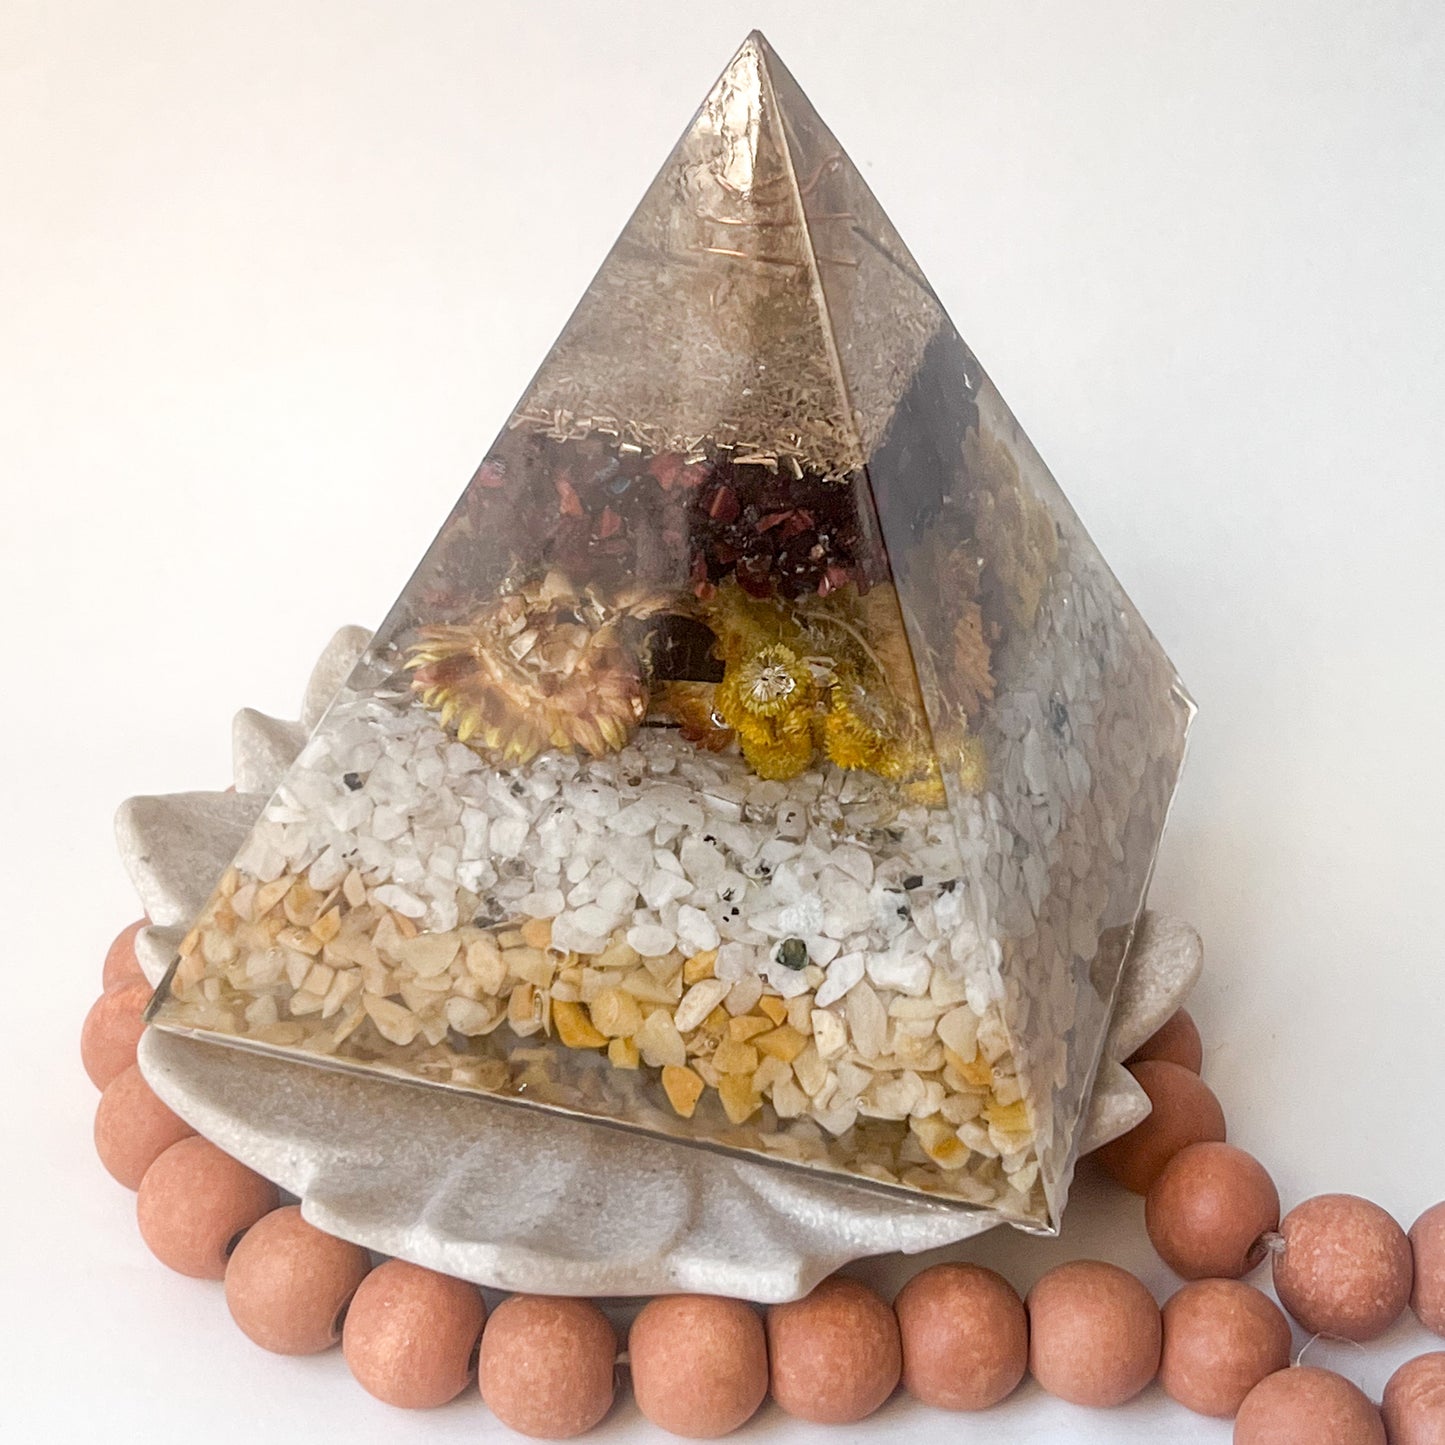 Beautifully crafted orgonite pyramid for meditation and relaxation with dried flowers